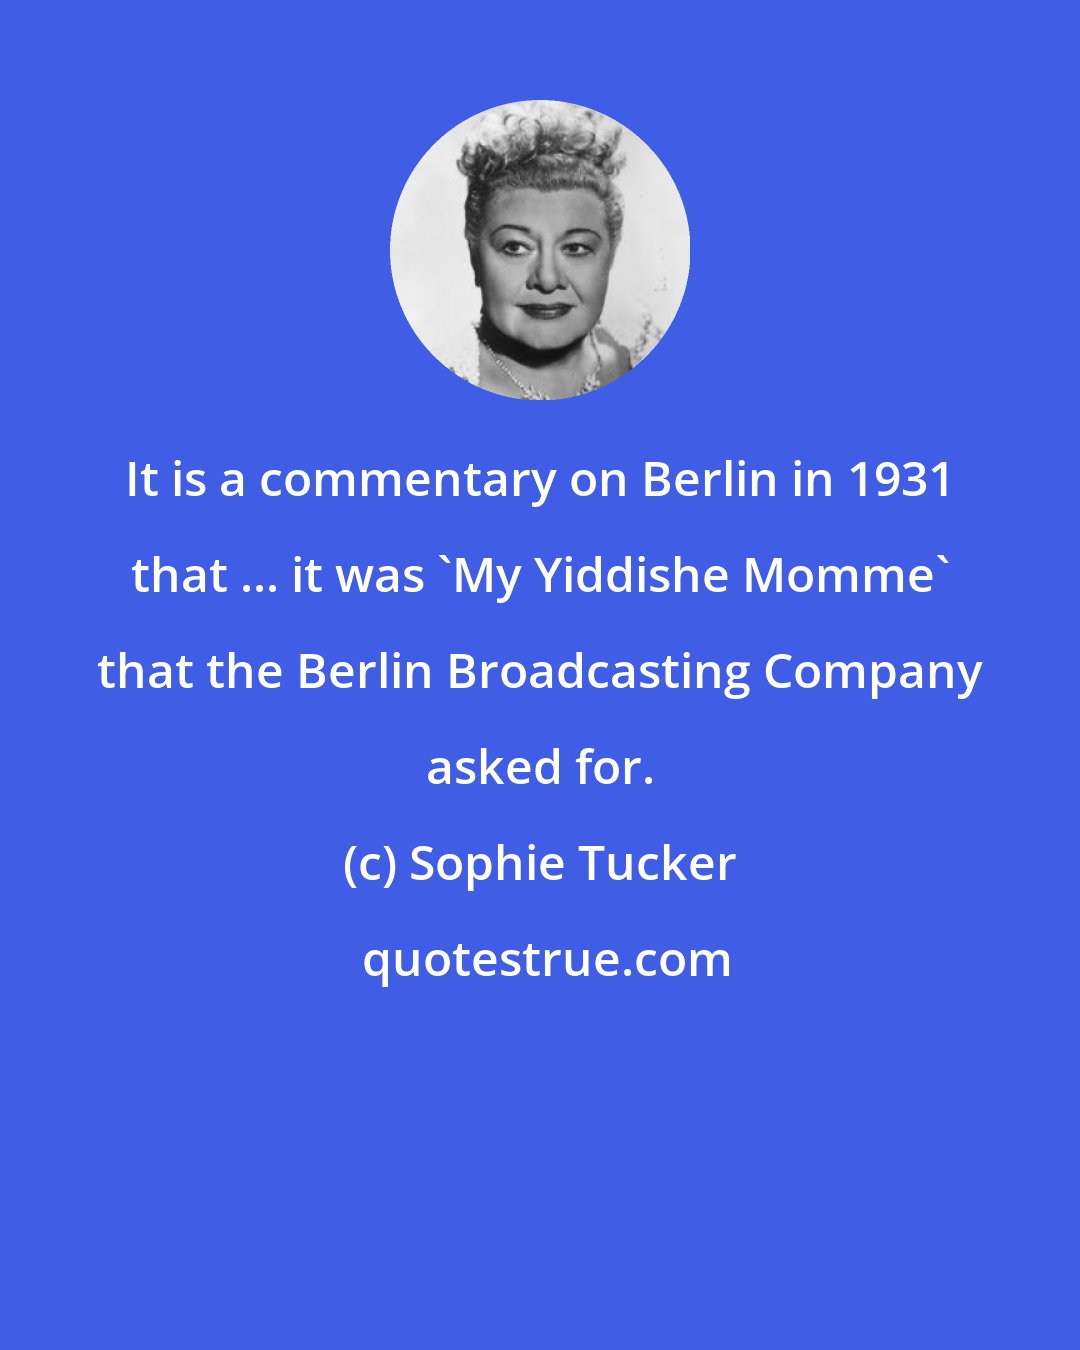 Sophie Tucker: It is a commentary on Berlin in 1931 that ... it was 'My Yiddishe Momme' that the Berlin Broadcasting Company asked for.